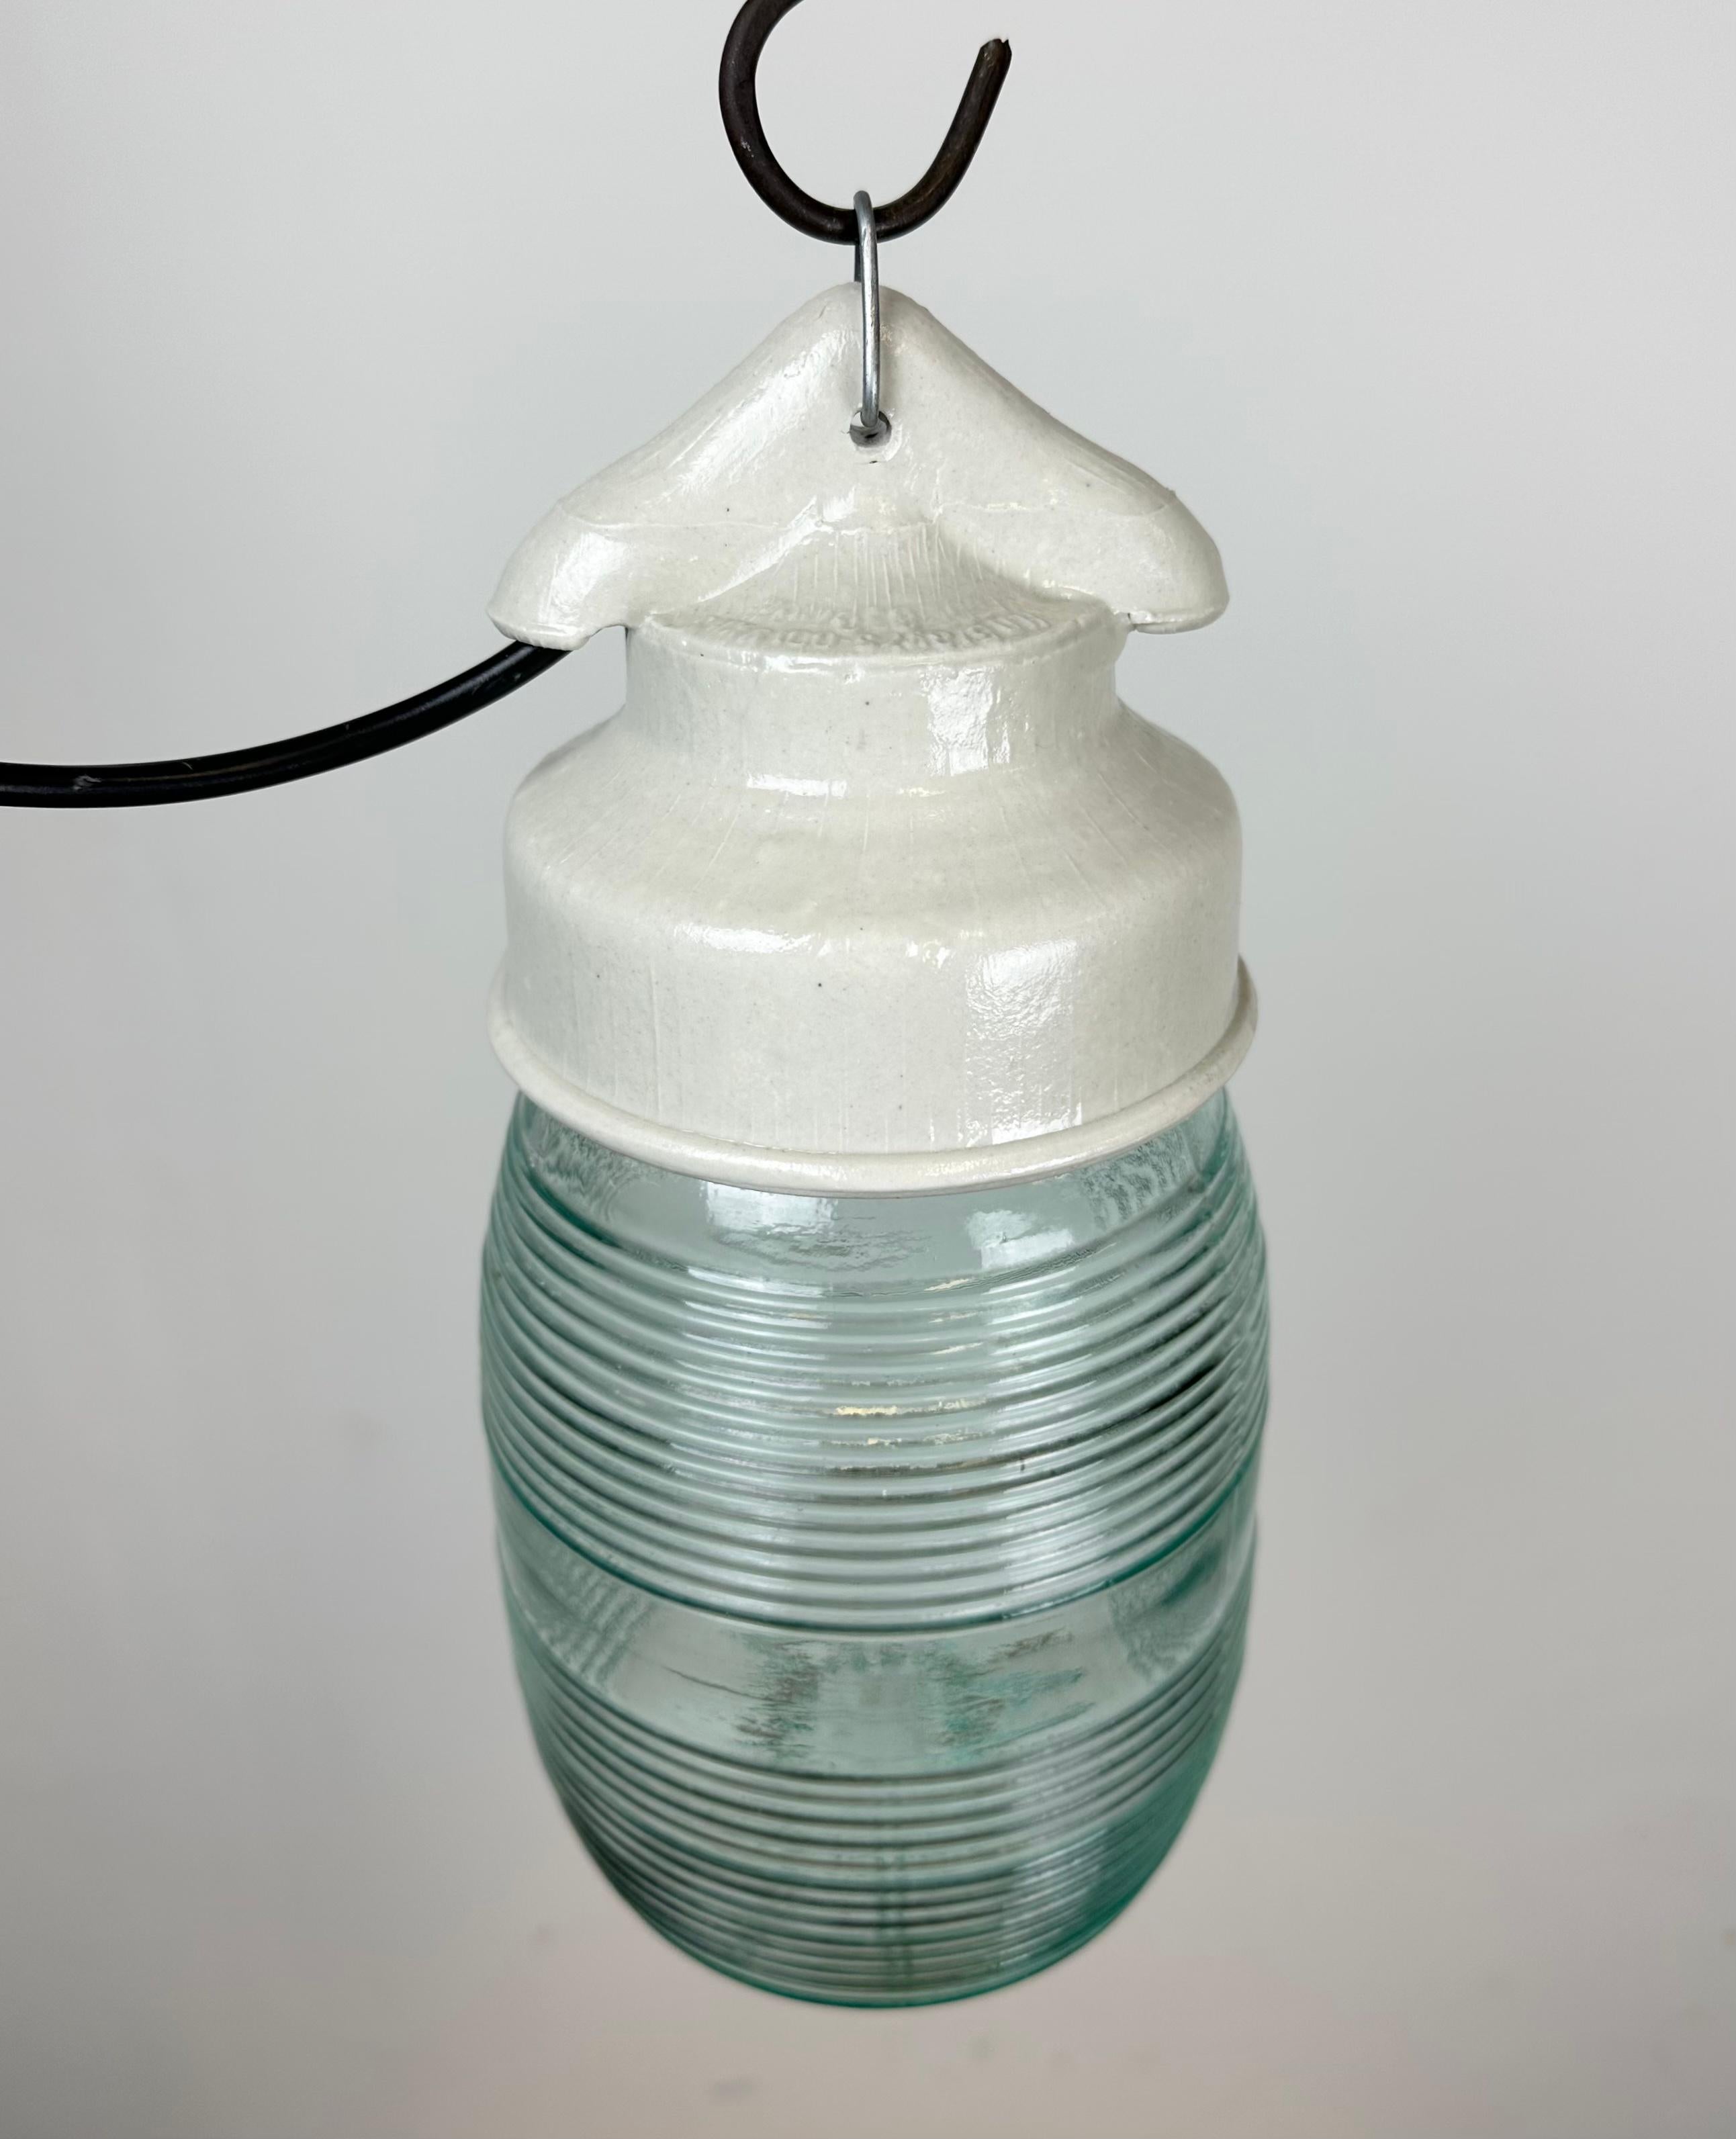 Industrial White Porcelain Pendant Light with Ribbed Glass, 1970s For Sale 1